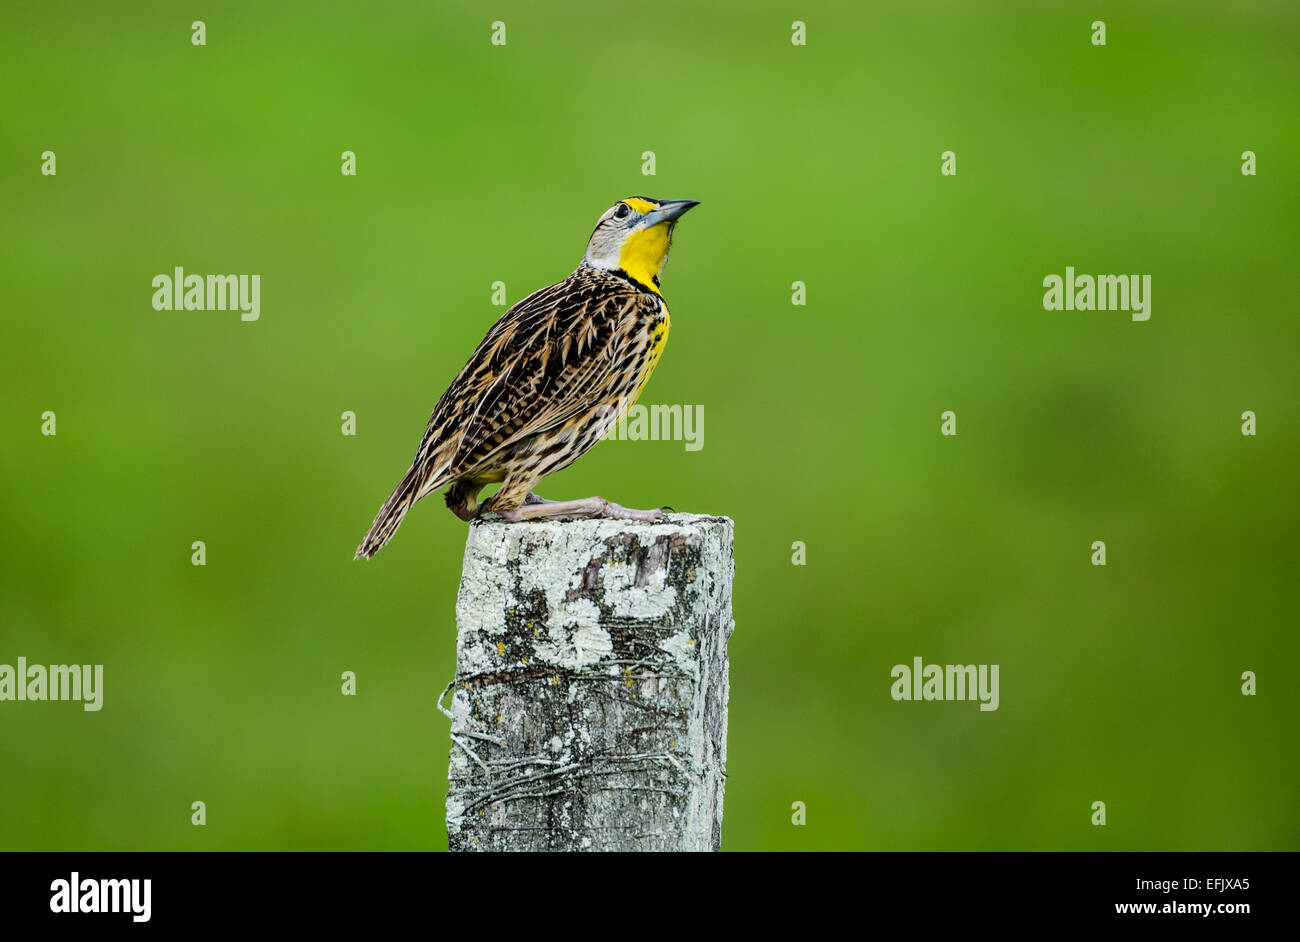 An Eastern Meadowlark (Sturnella magna) perched on a wooden post. Belize, Central America. Stock Photo